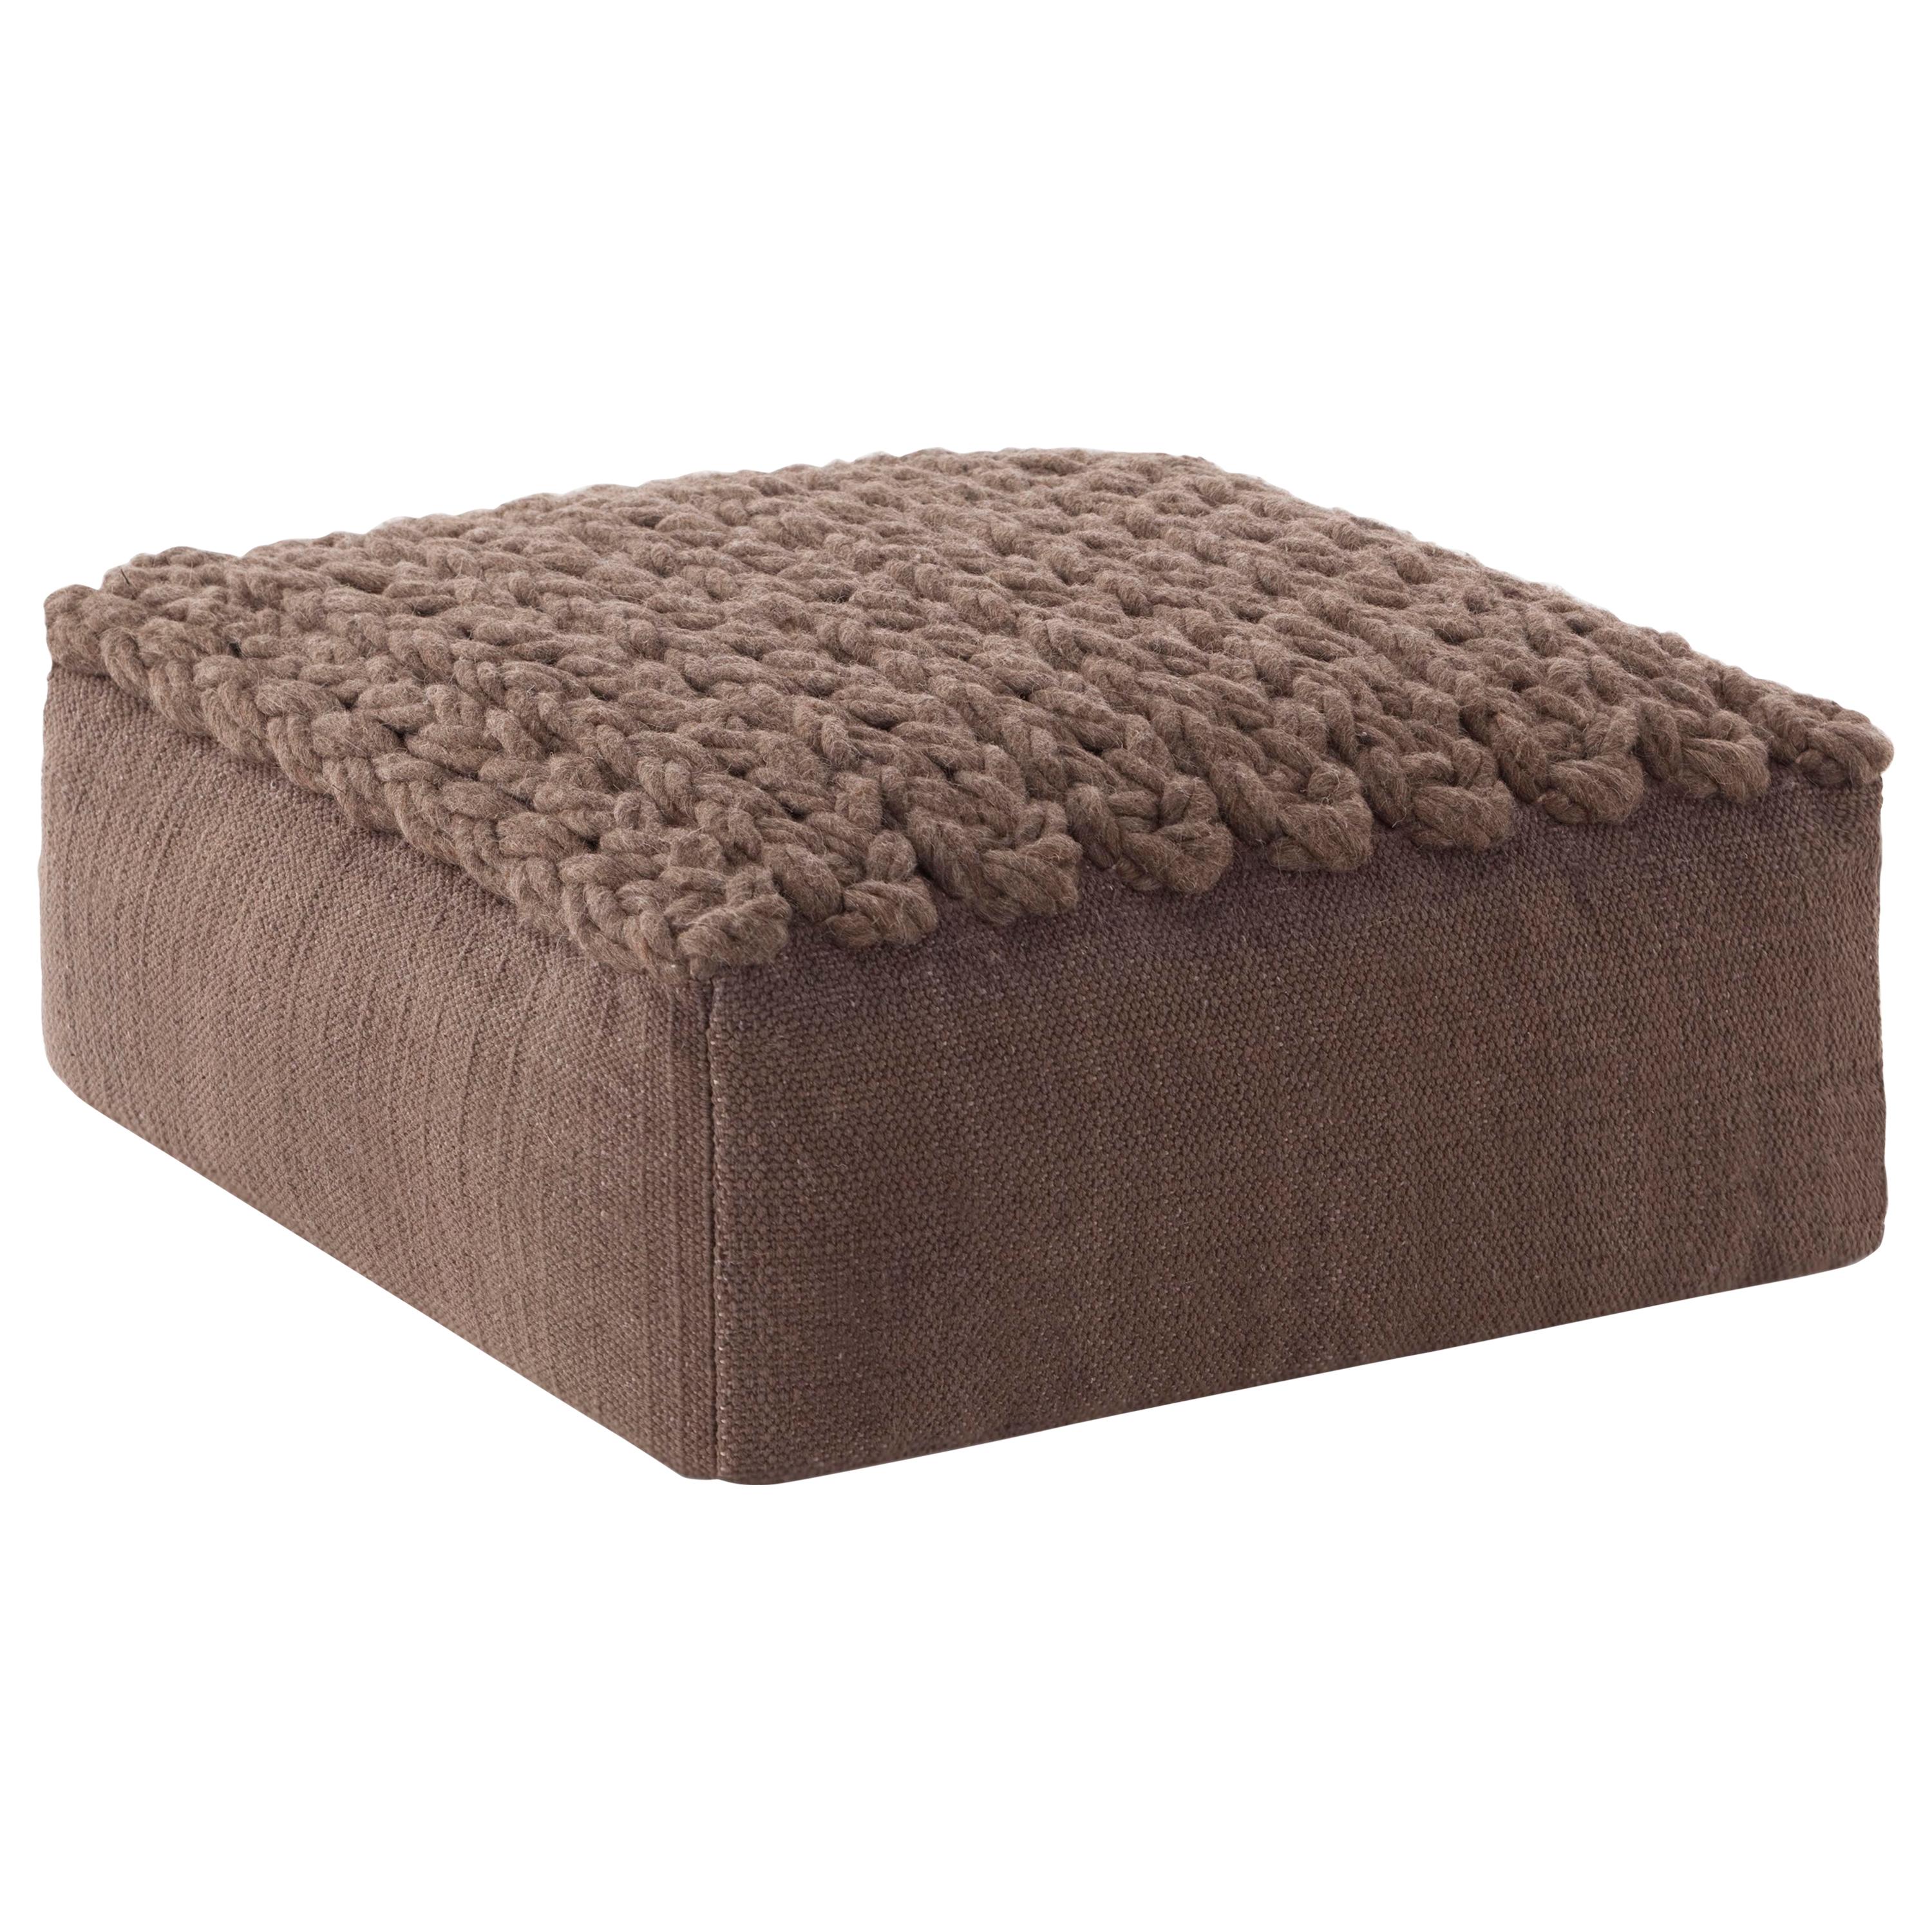 (Brown) GAN Trenzas Small Square Pouf with Braided Seat